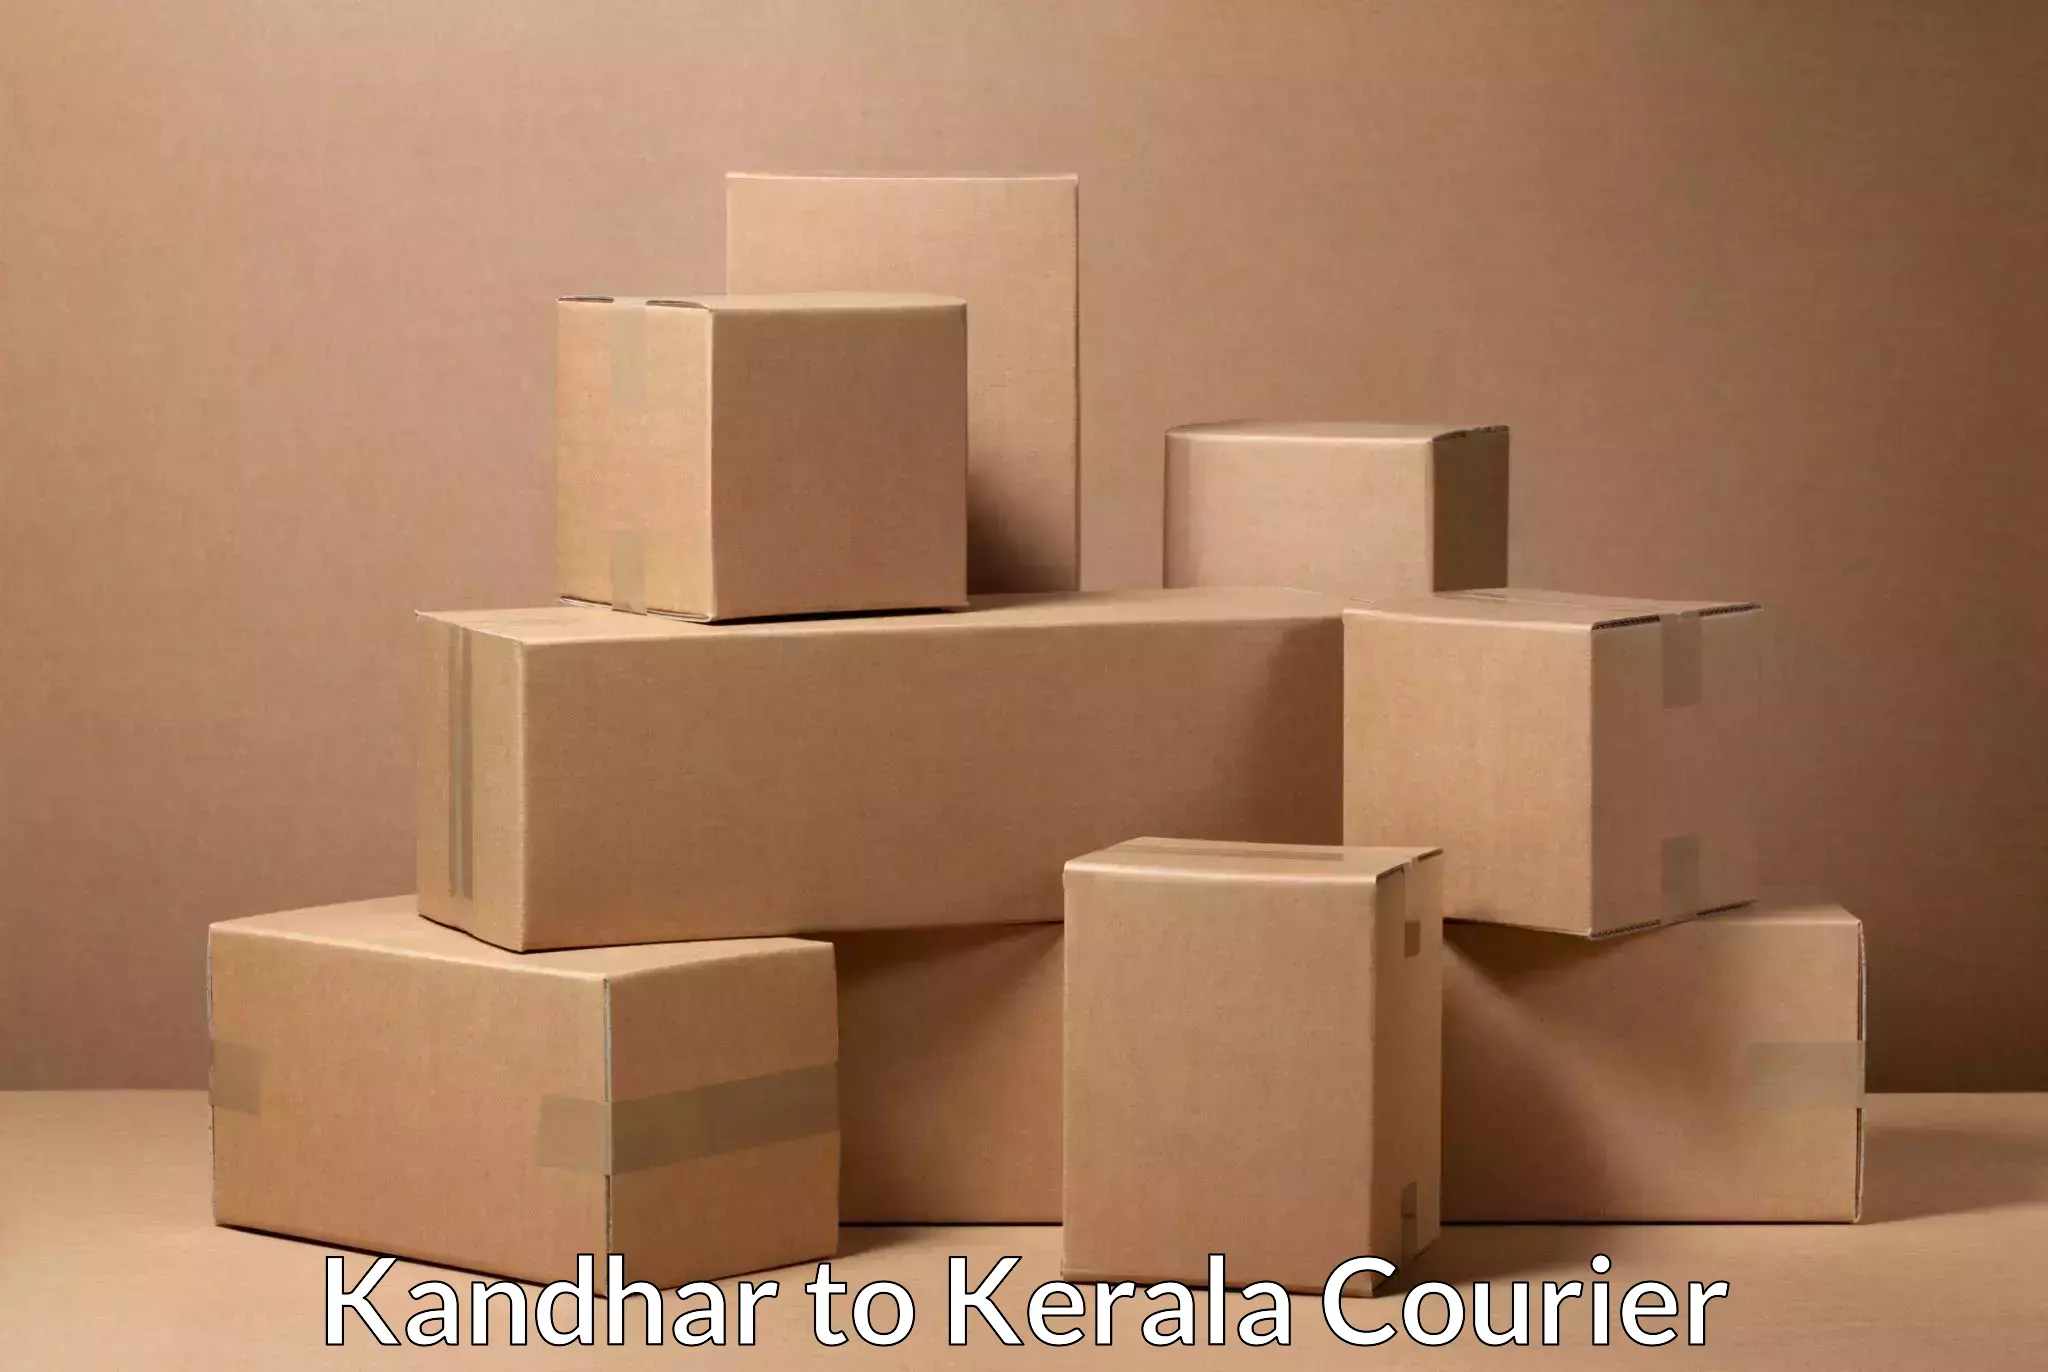 On-call courier service Kandhar to Cochin Port Kochi